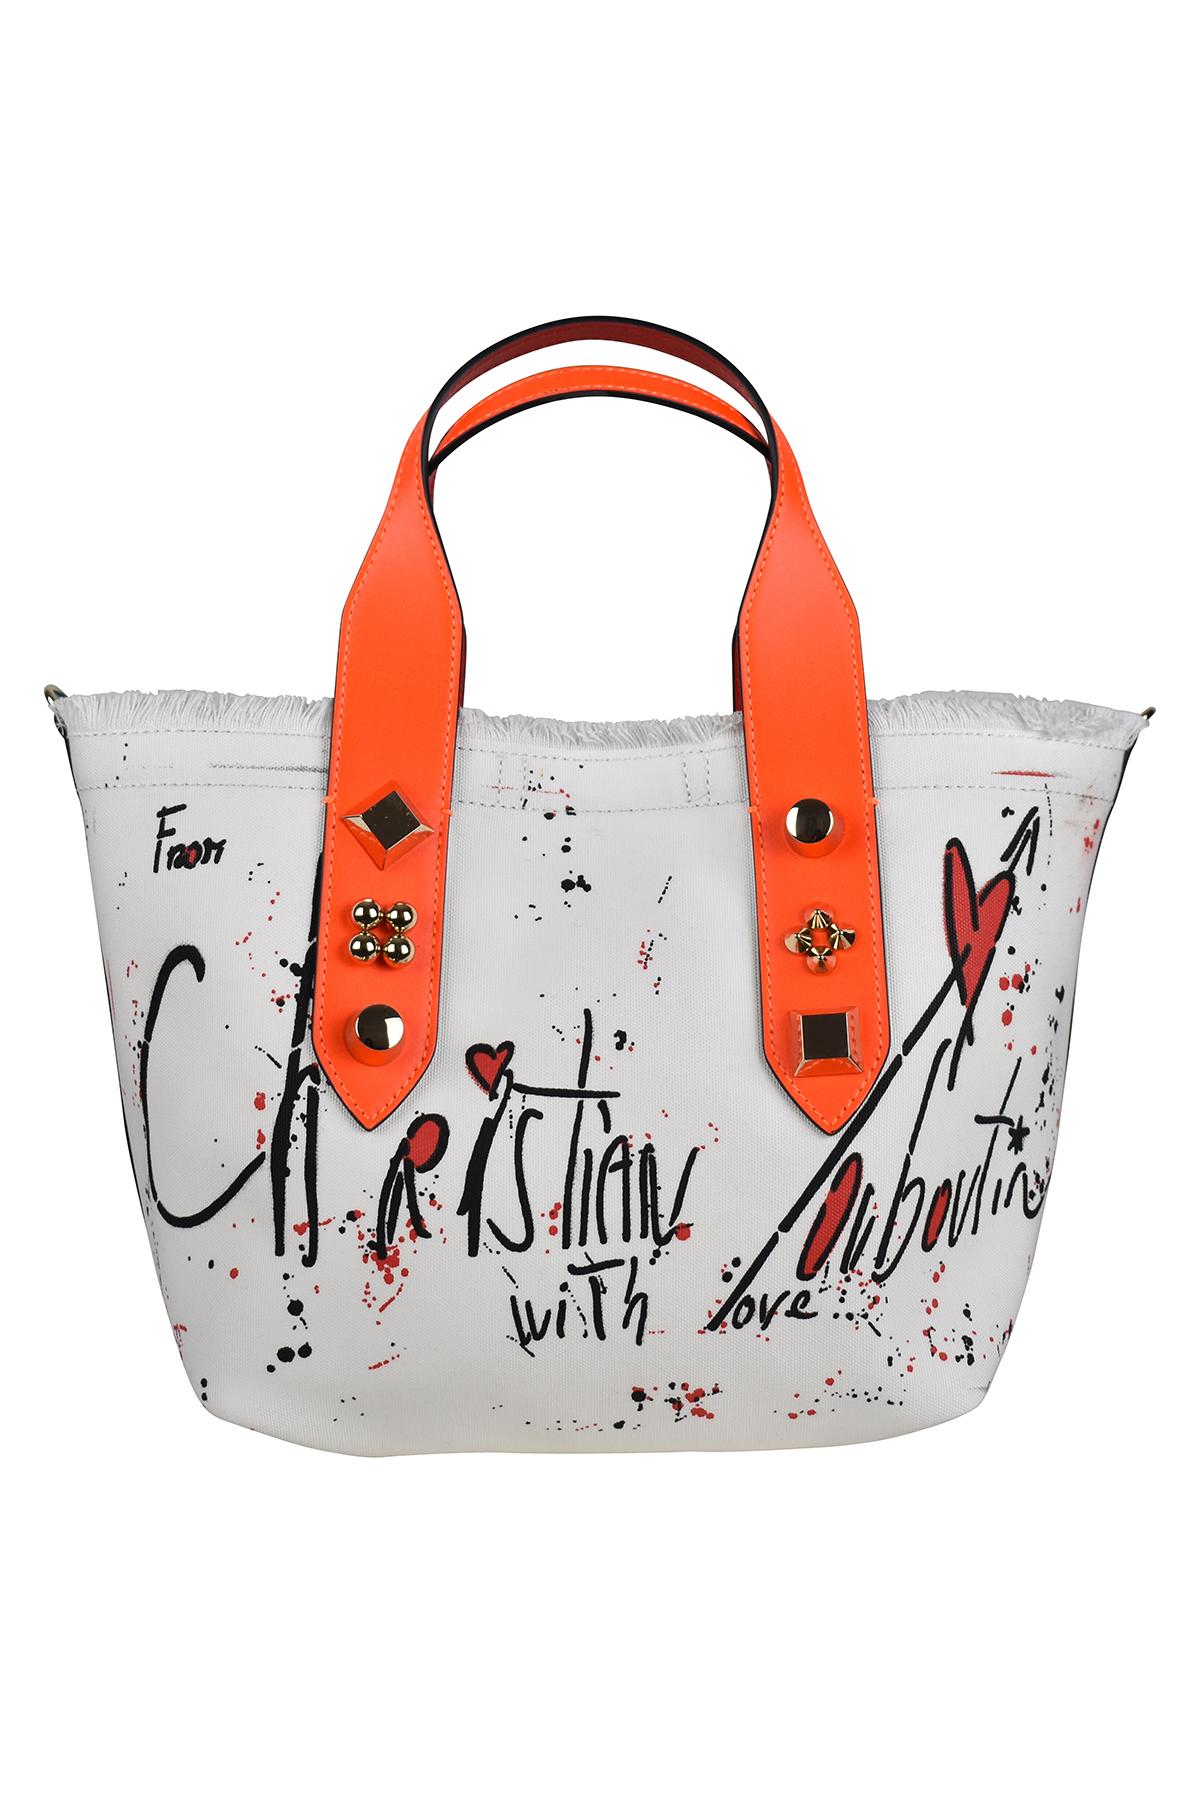 X Rossy De Palma Flamencaba Small Embroidered Tote Bag in Black - Christian  Louboutin